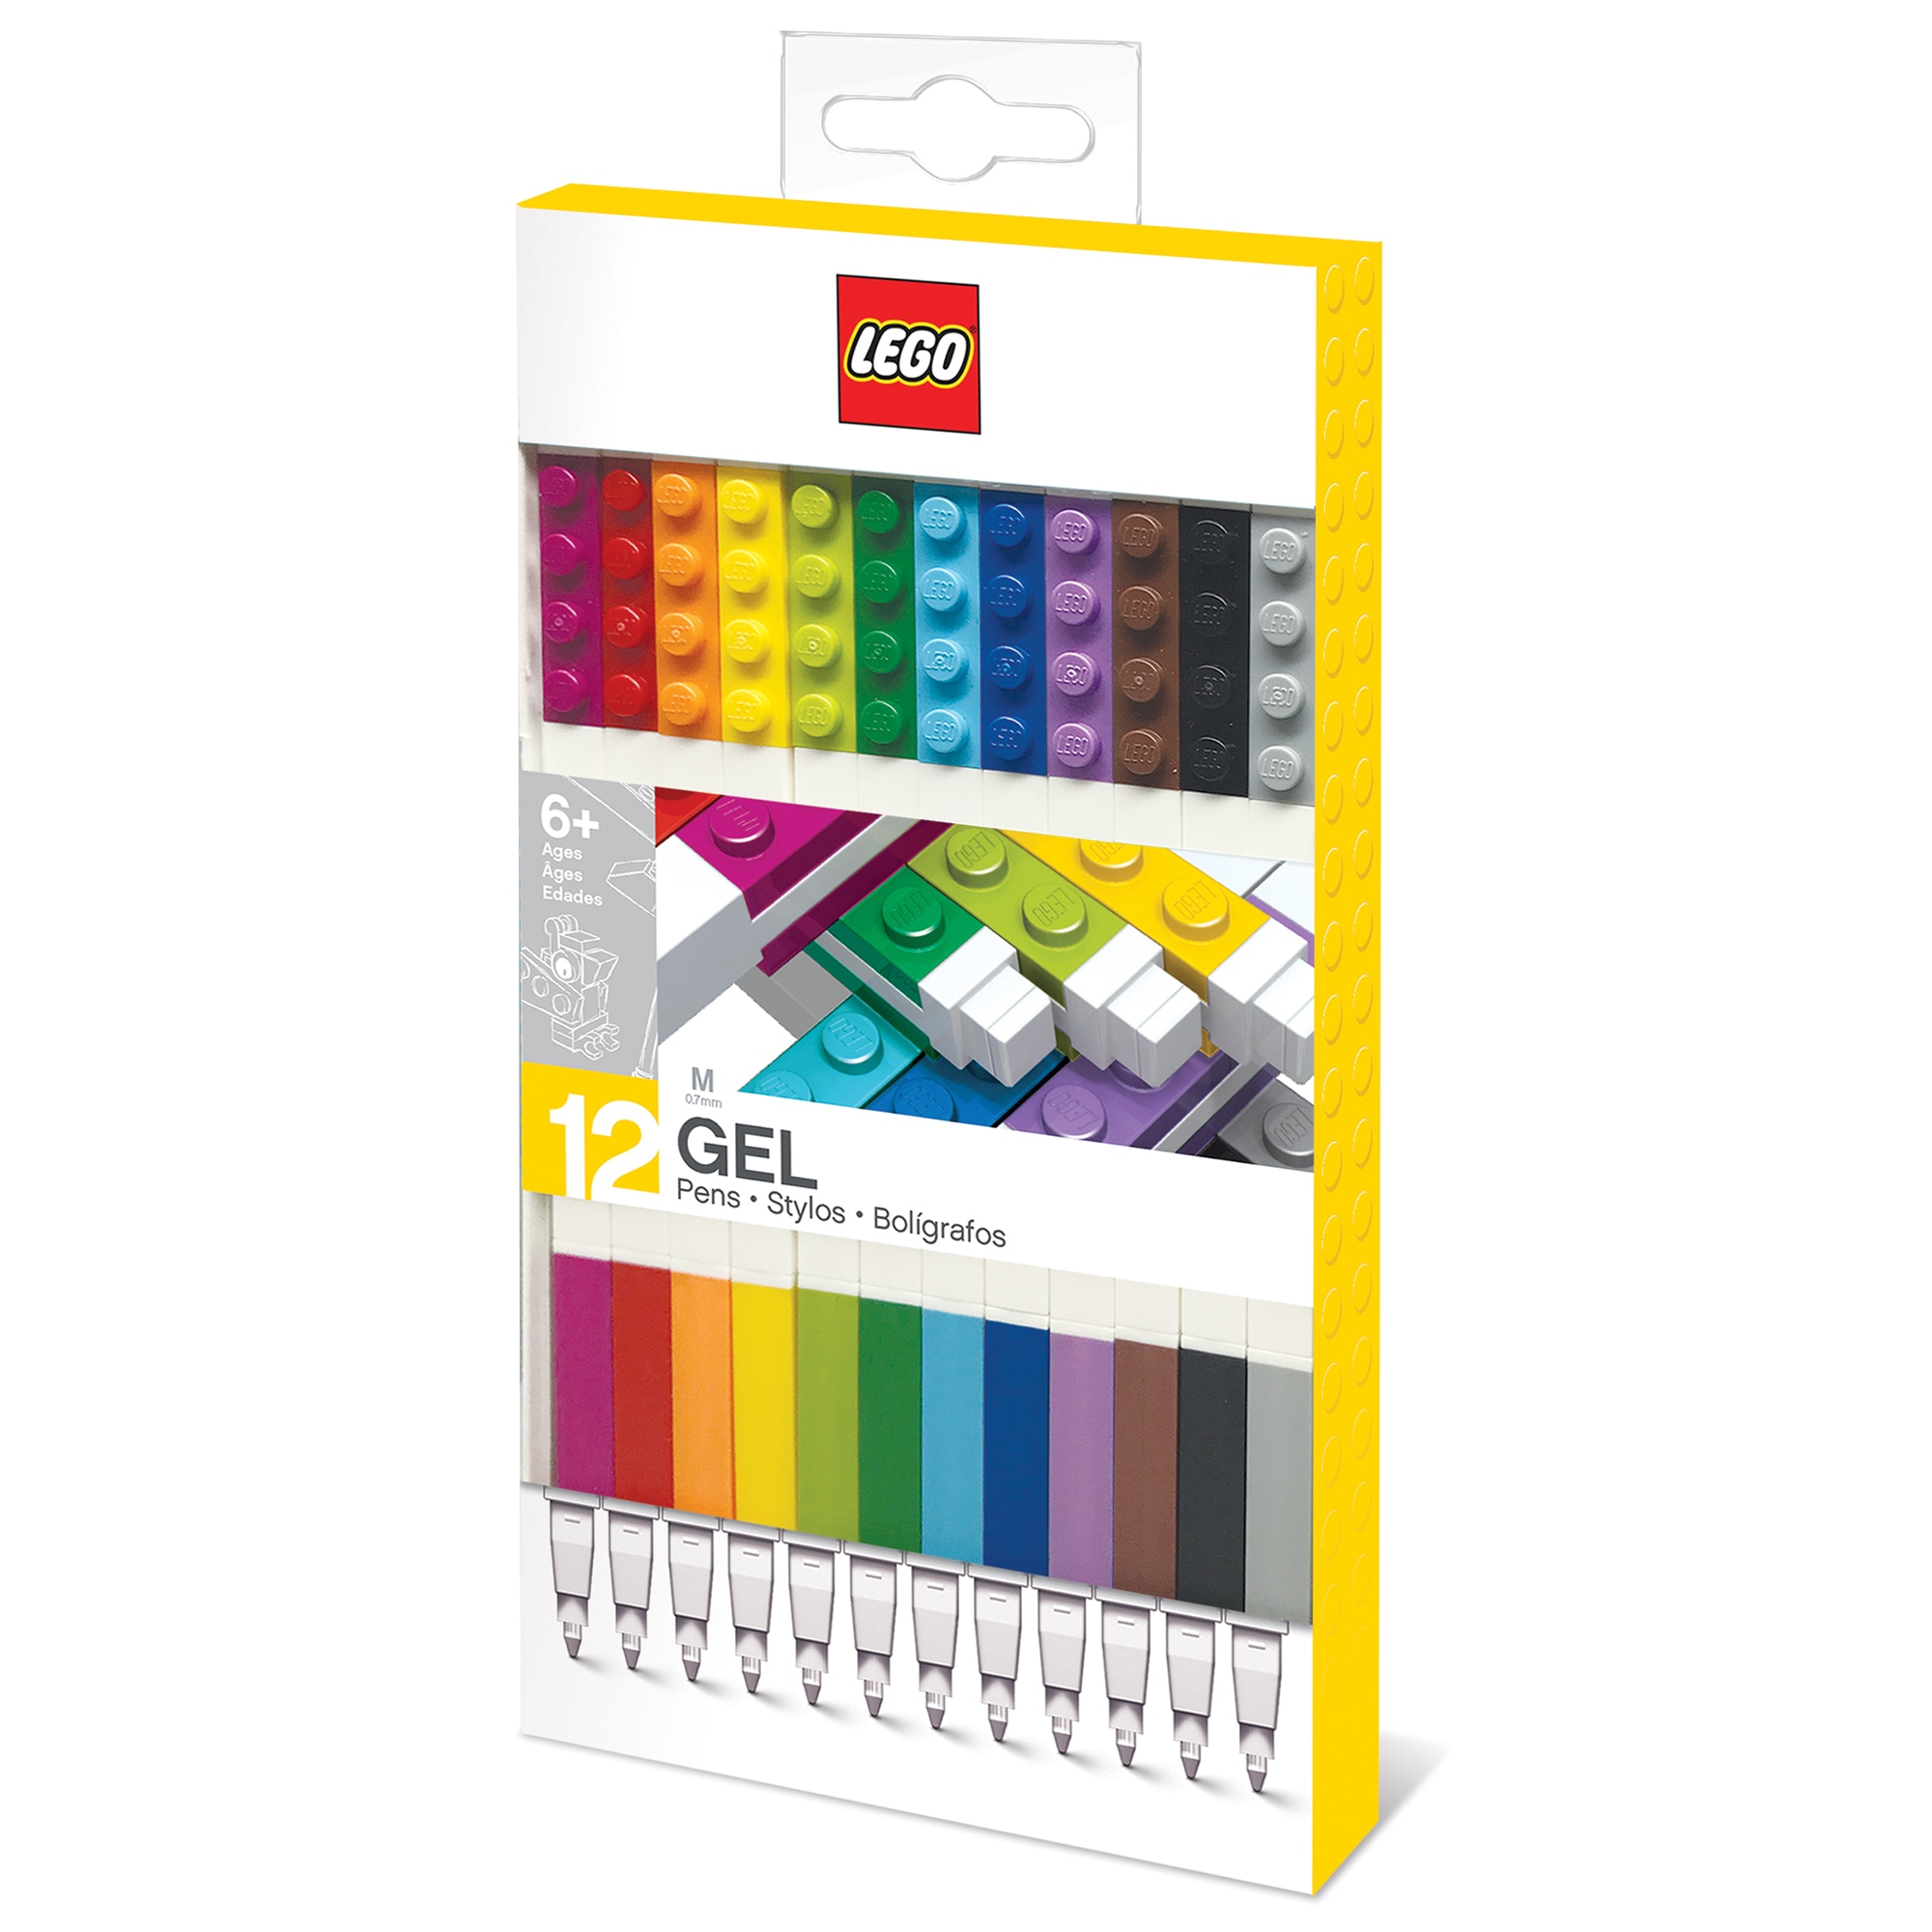 LEGO 12 Pack Gel Pens, Ages 6 to Adult - image 1 of 6